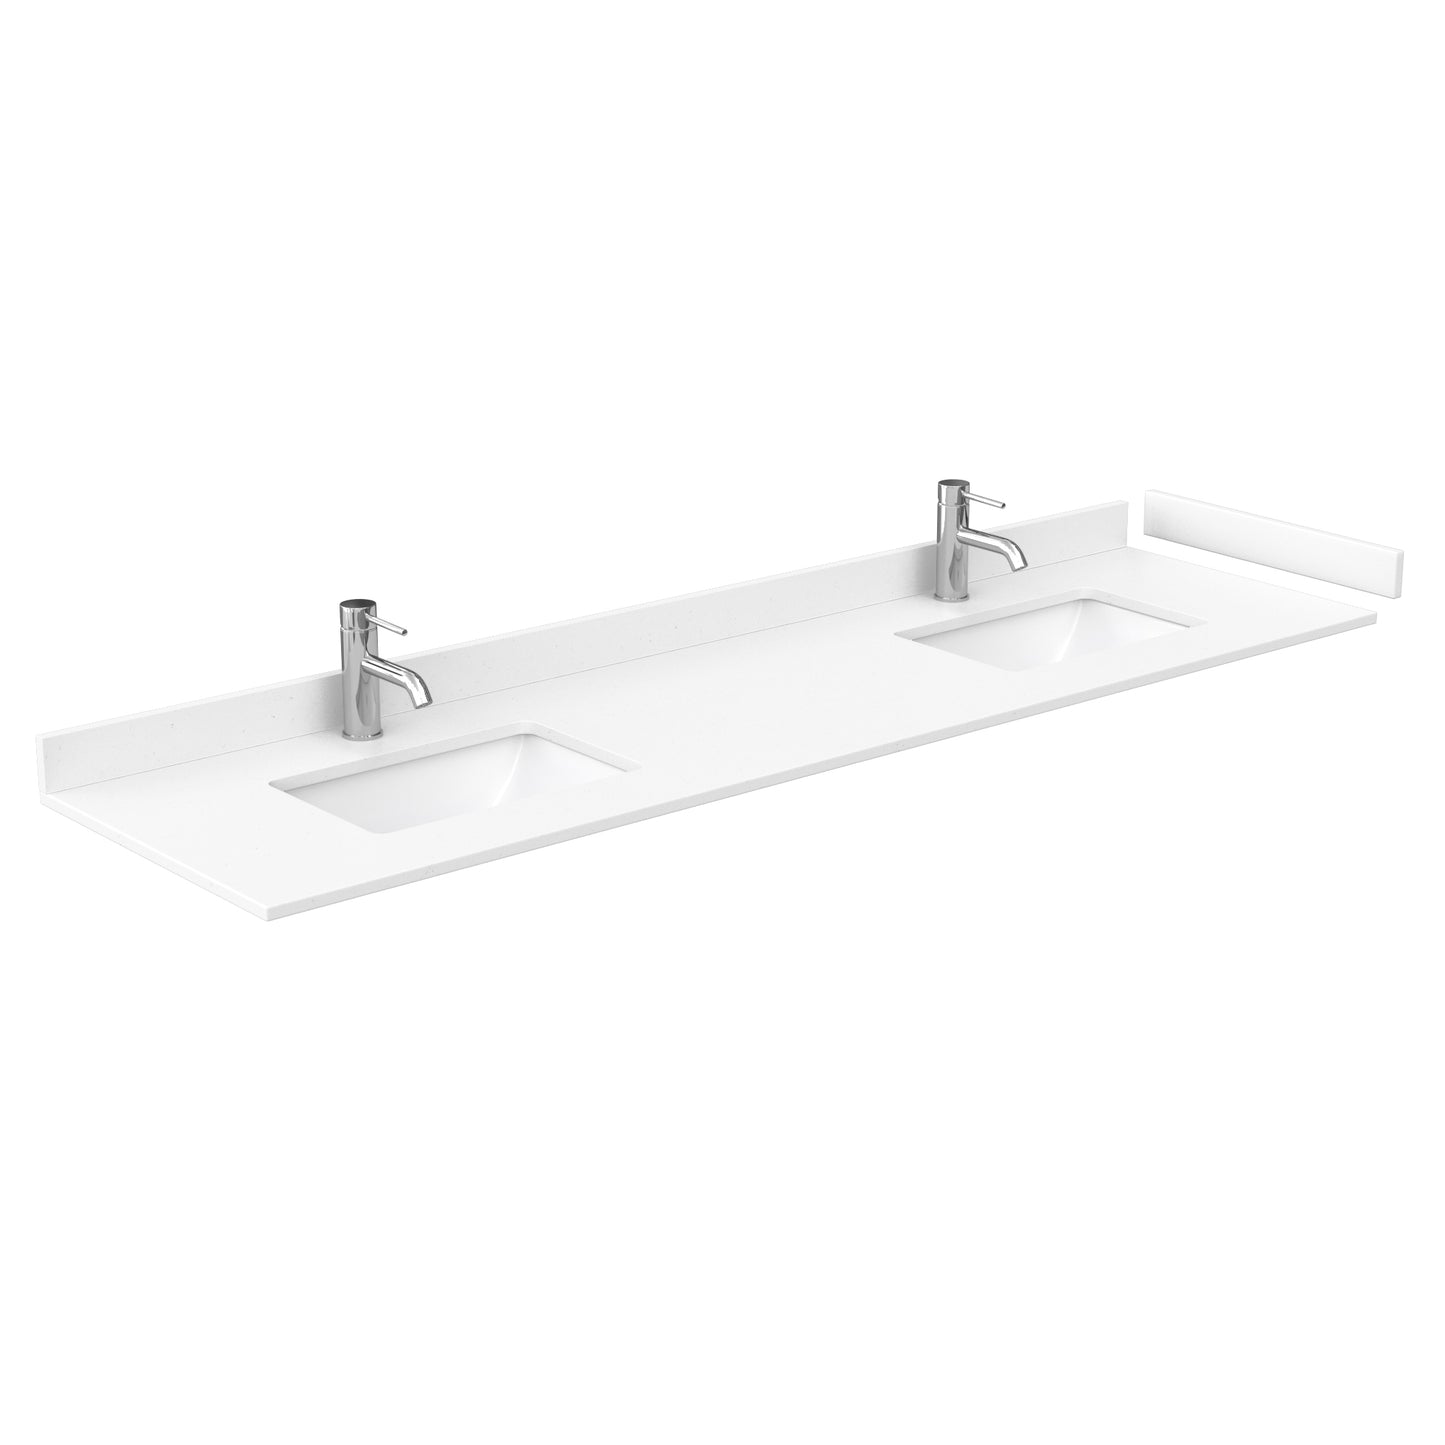 Wyndham Avery 80 Inch Double Bathroom Vanity White Cultured Marble Countertop with Undermount Square Sinks in Matte Black Trim - Luxe Bathroom Vanities